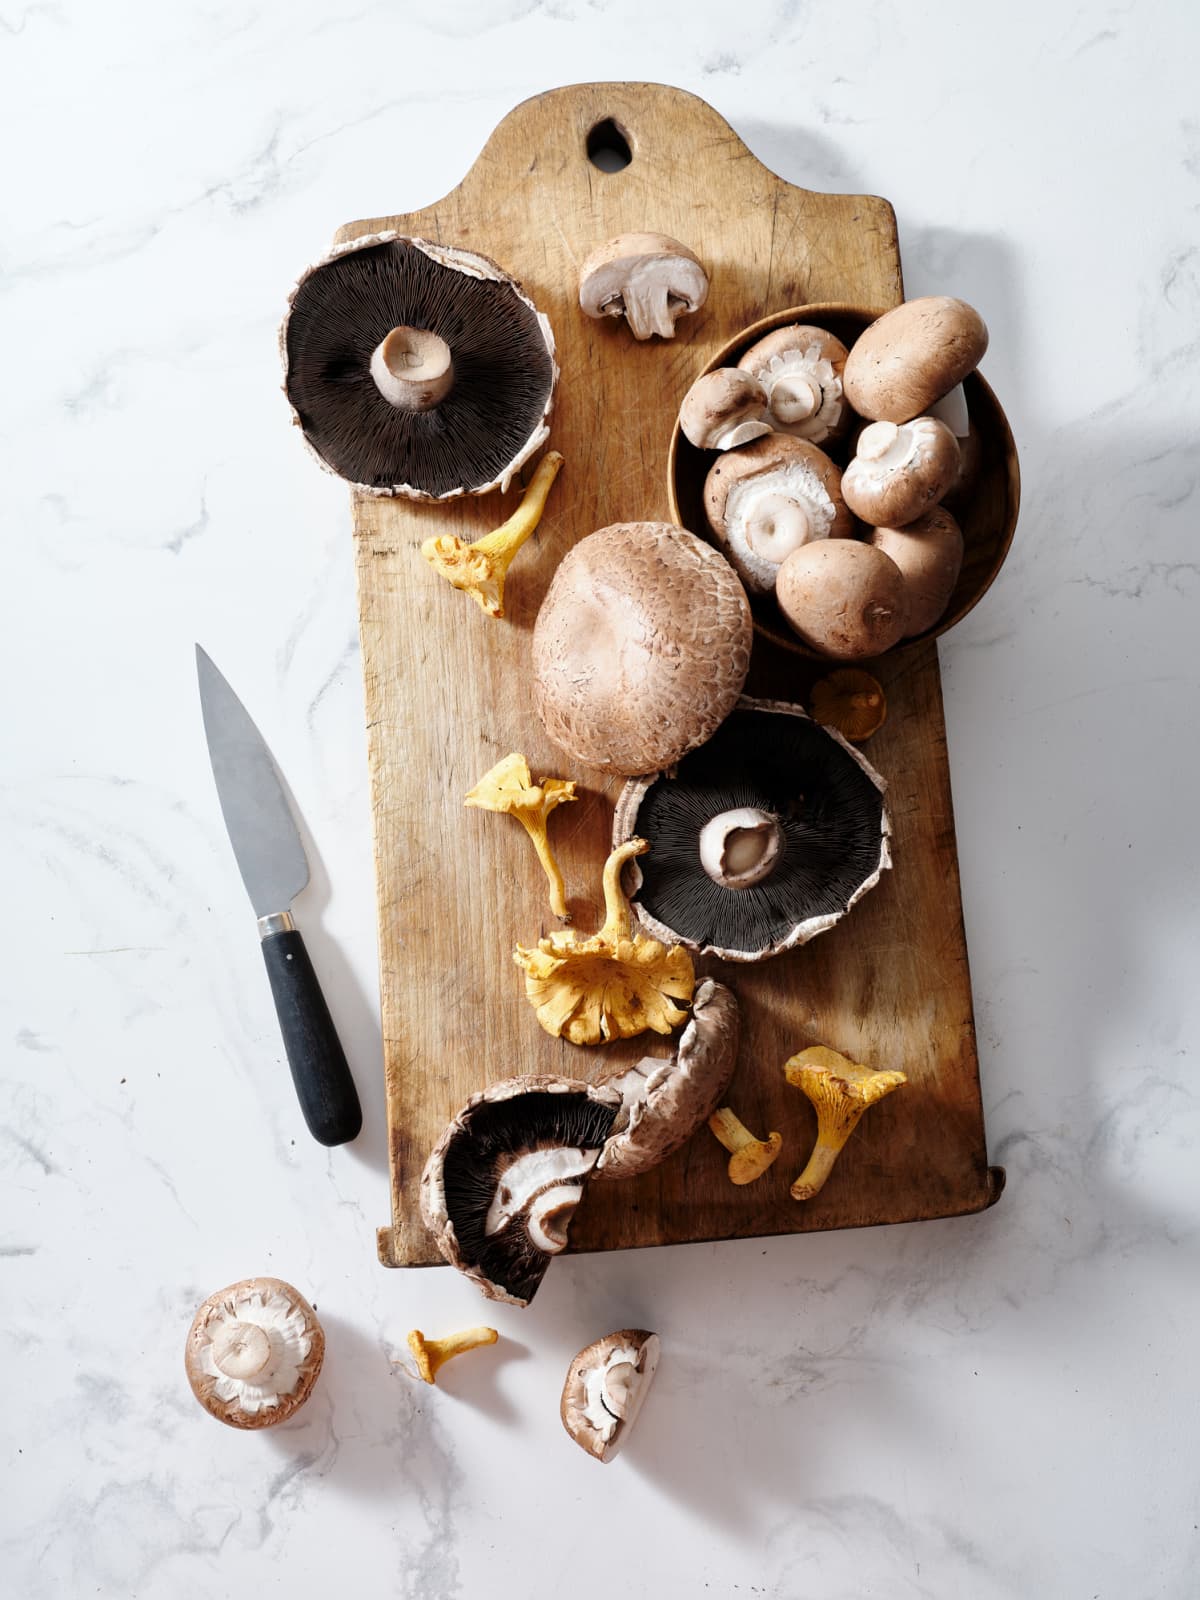 Various types of mushrooms on wooden cutting board with knife